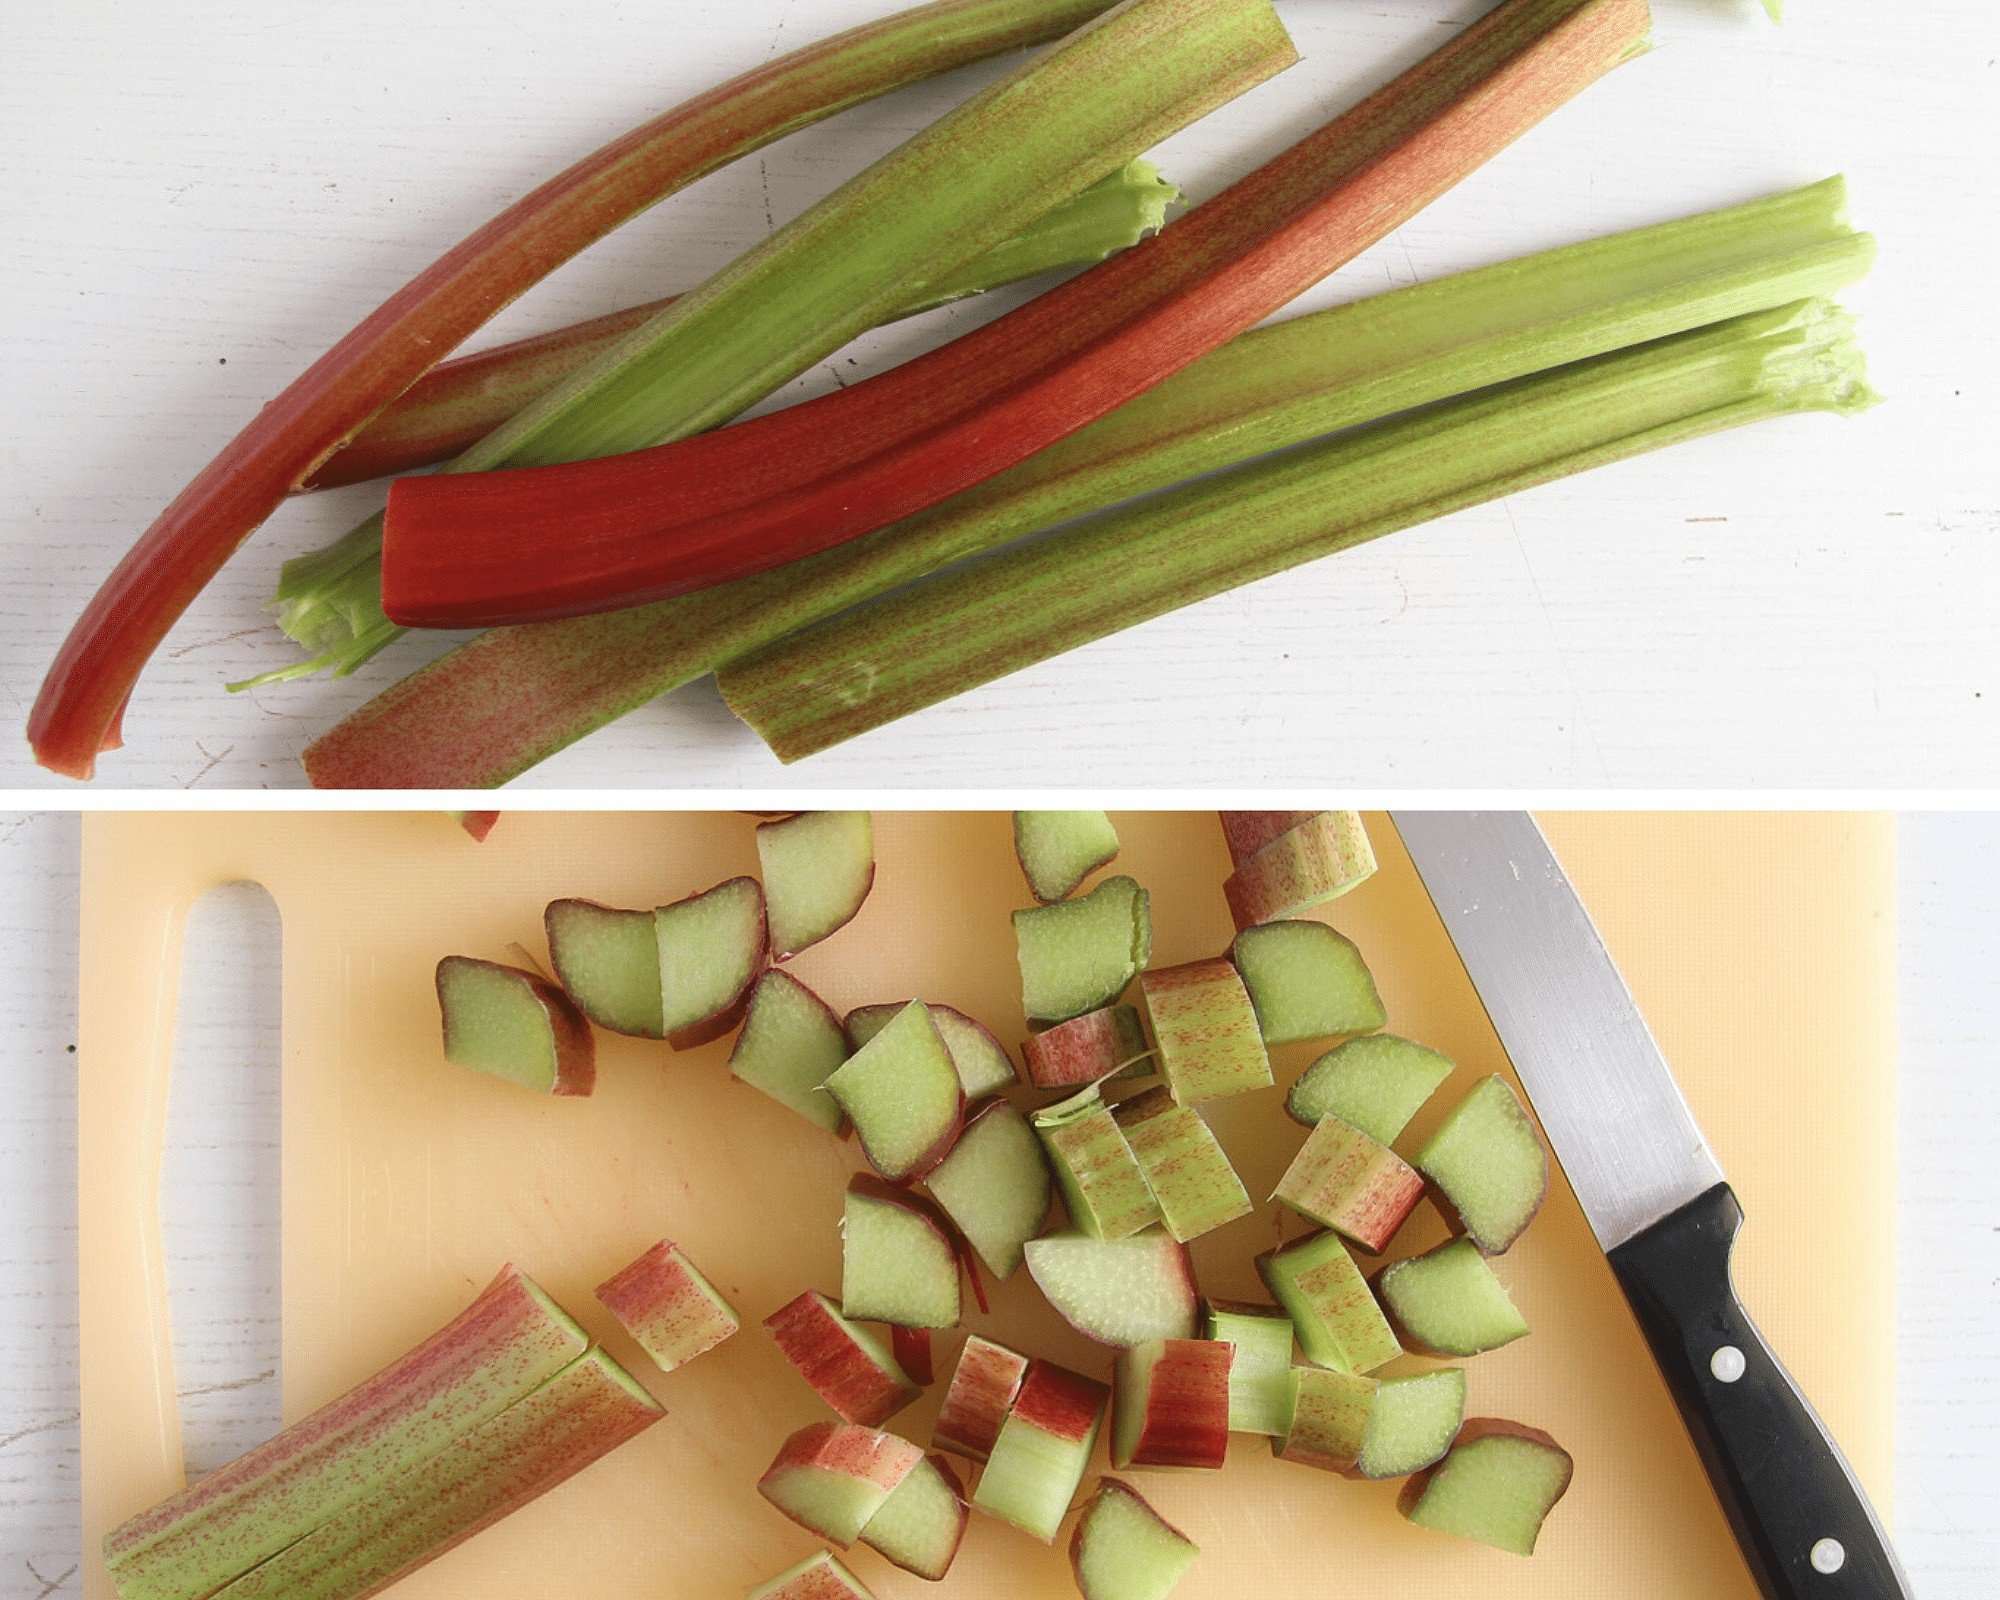 rhubarb stalks being chopped on a wooden board